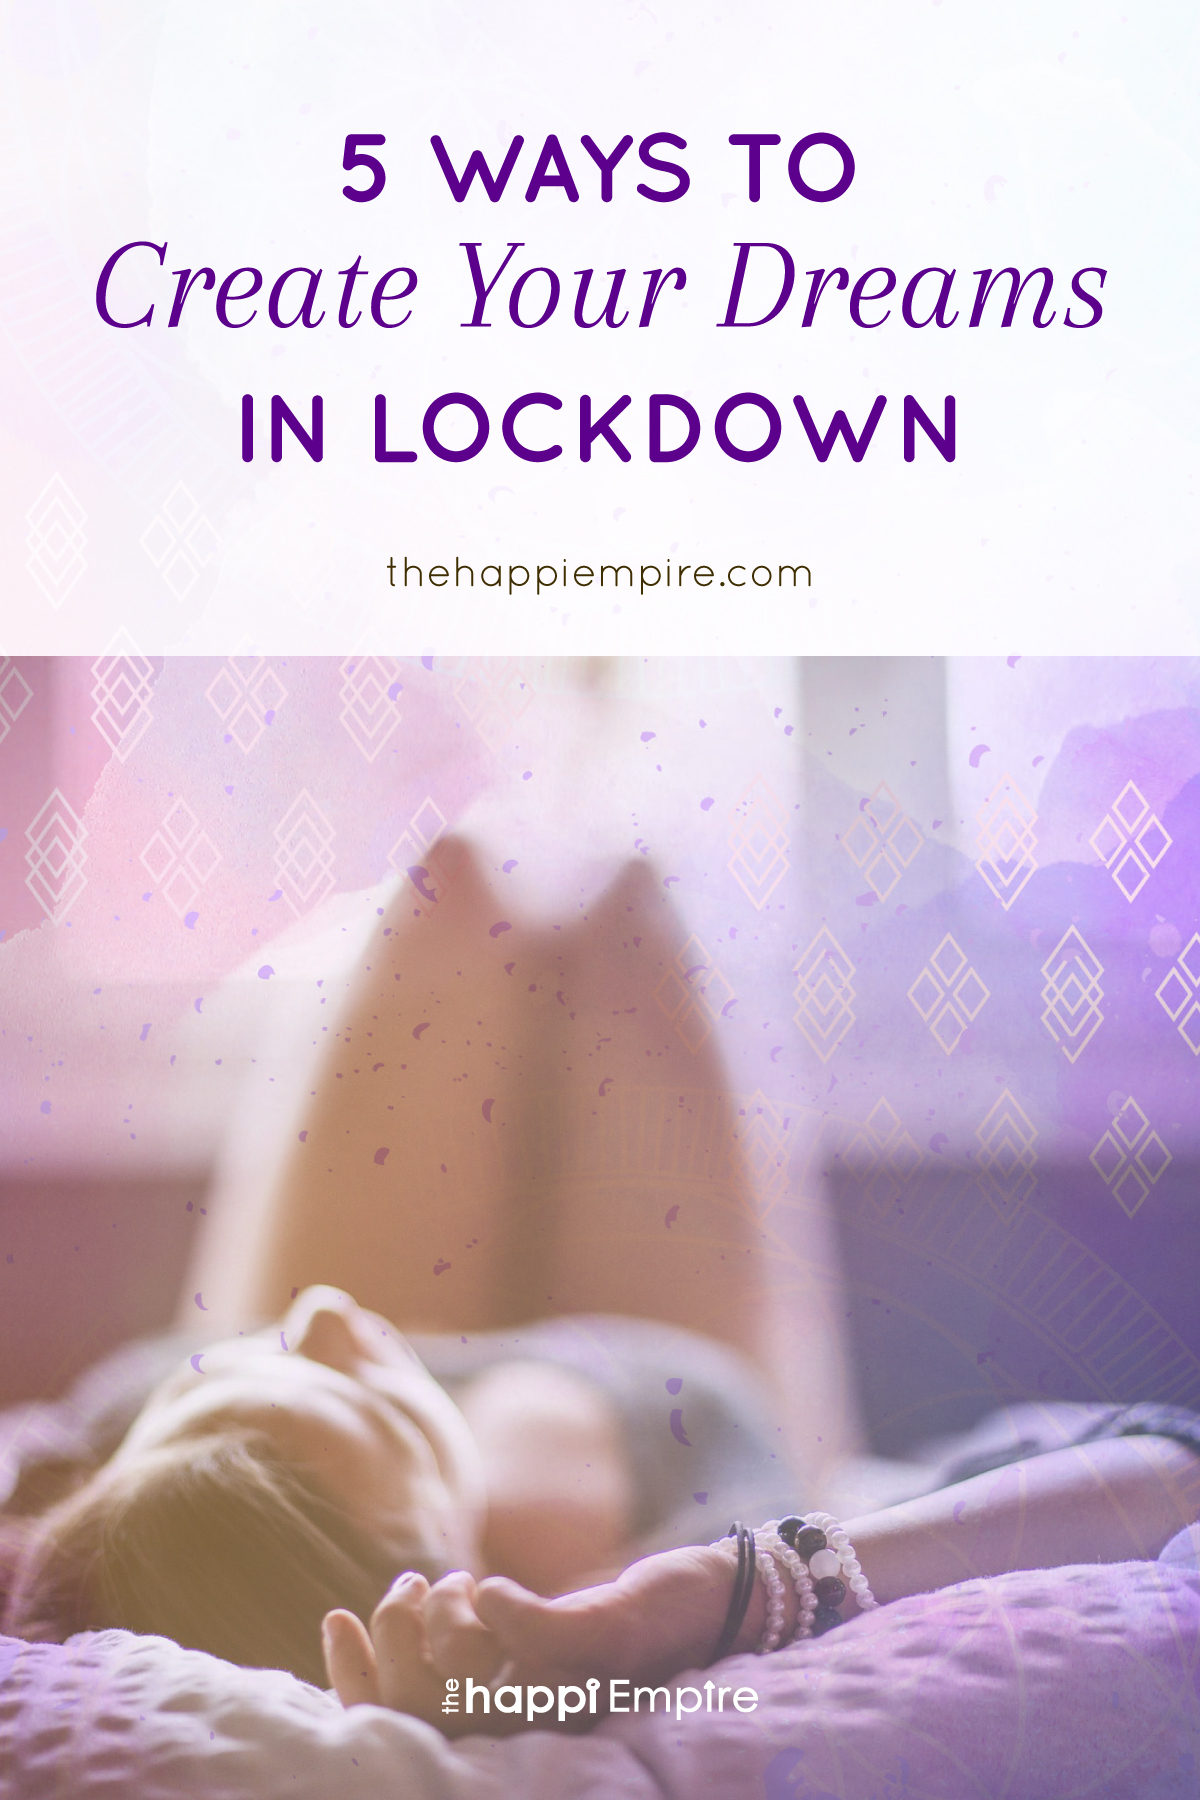 5 Ways To Create Your Dreams During Lockdown